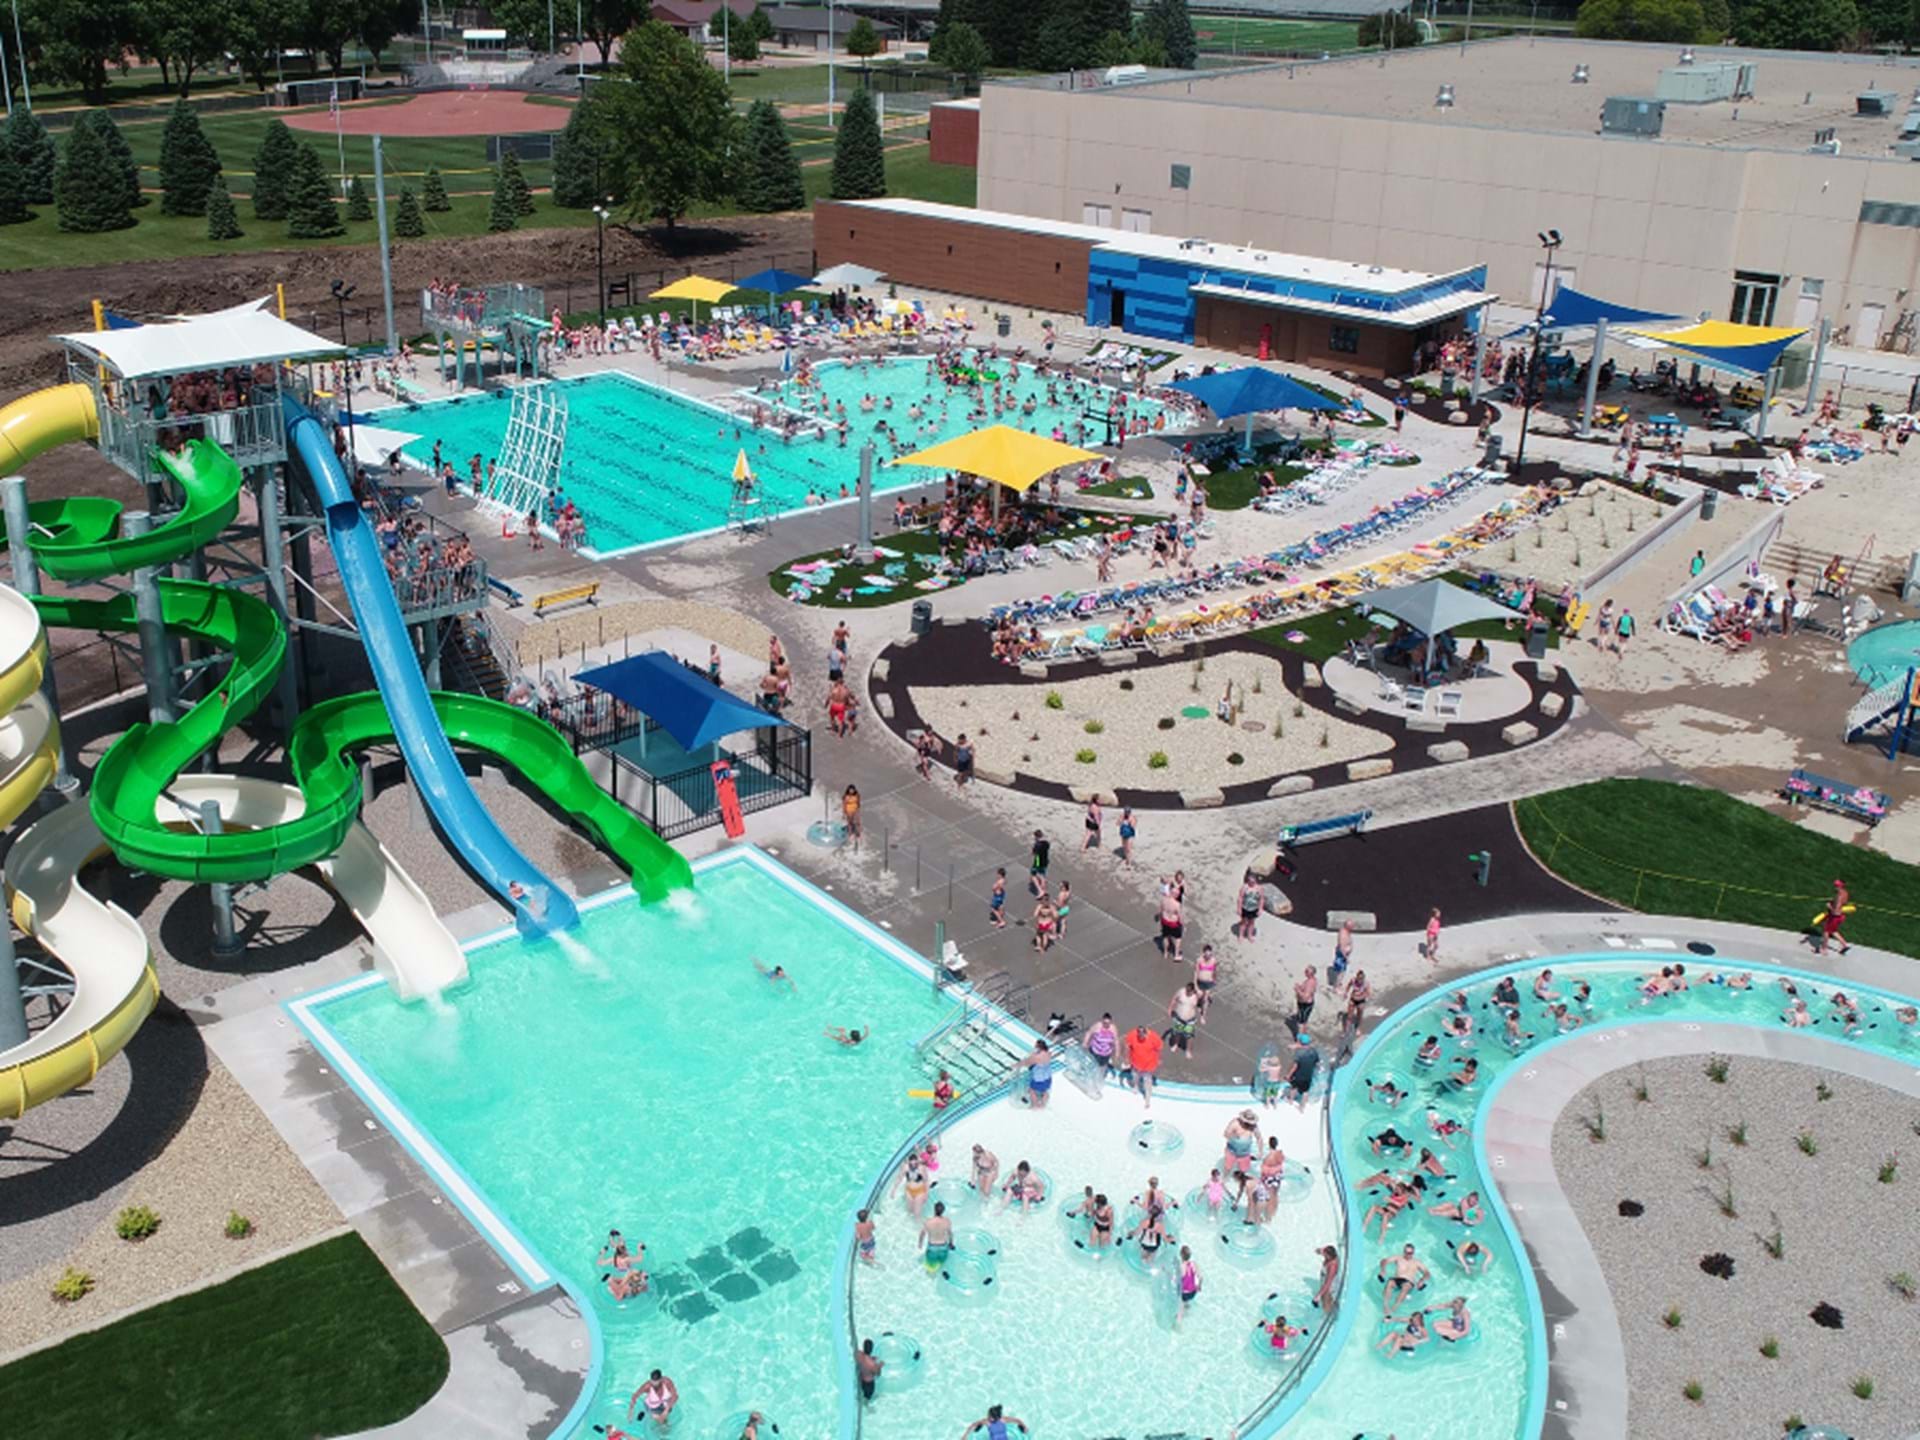 Float in the lazy river or speed down the slides!